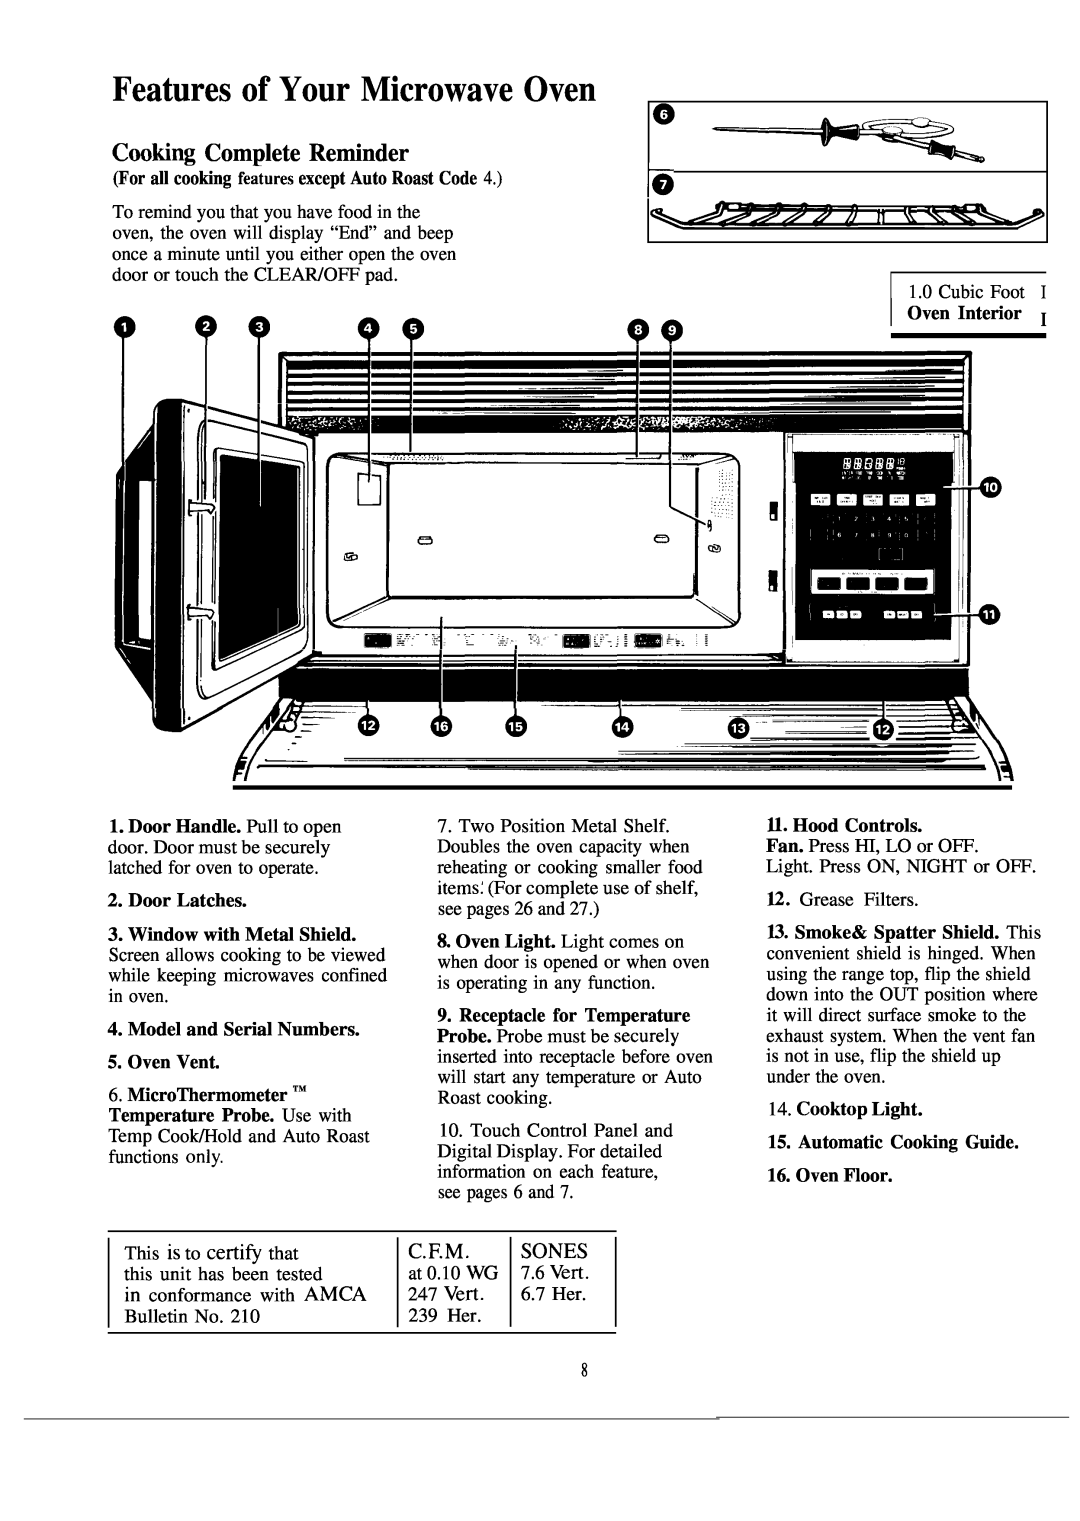 GE JVM172J warranty Features of Your Microwave Oven, Cooting Complete Reminder, Sones 